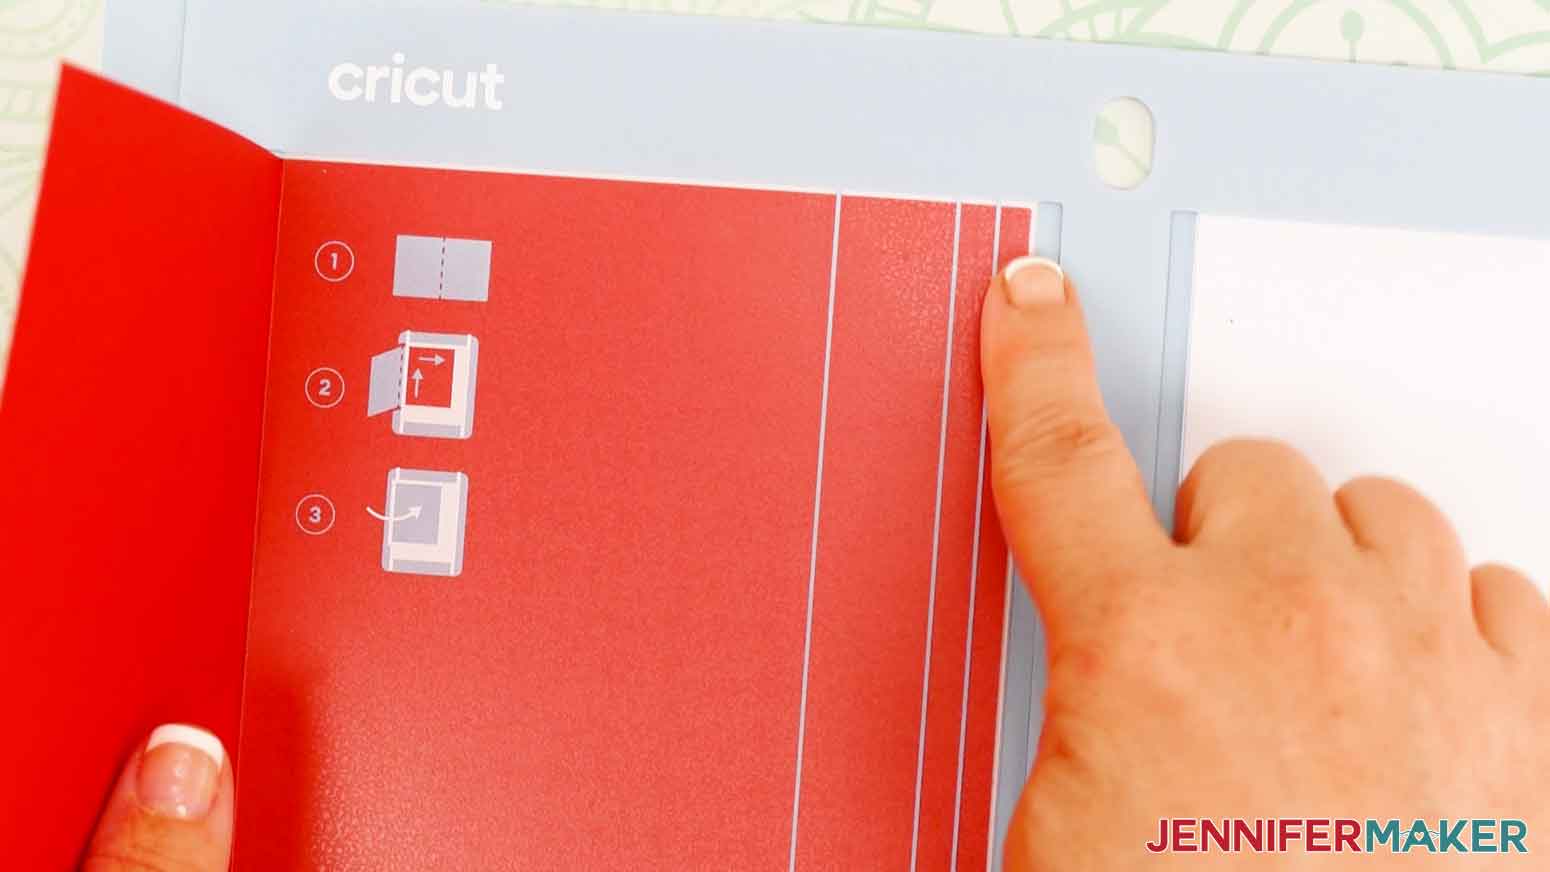 Inserting pre-folded square card into the new Cricut larger mat for Cricut Insert Cards